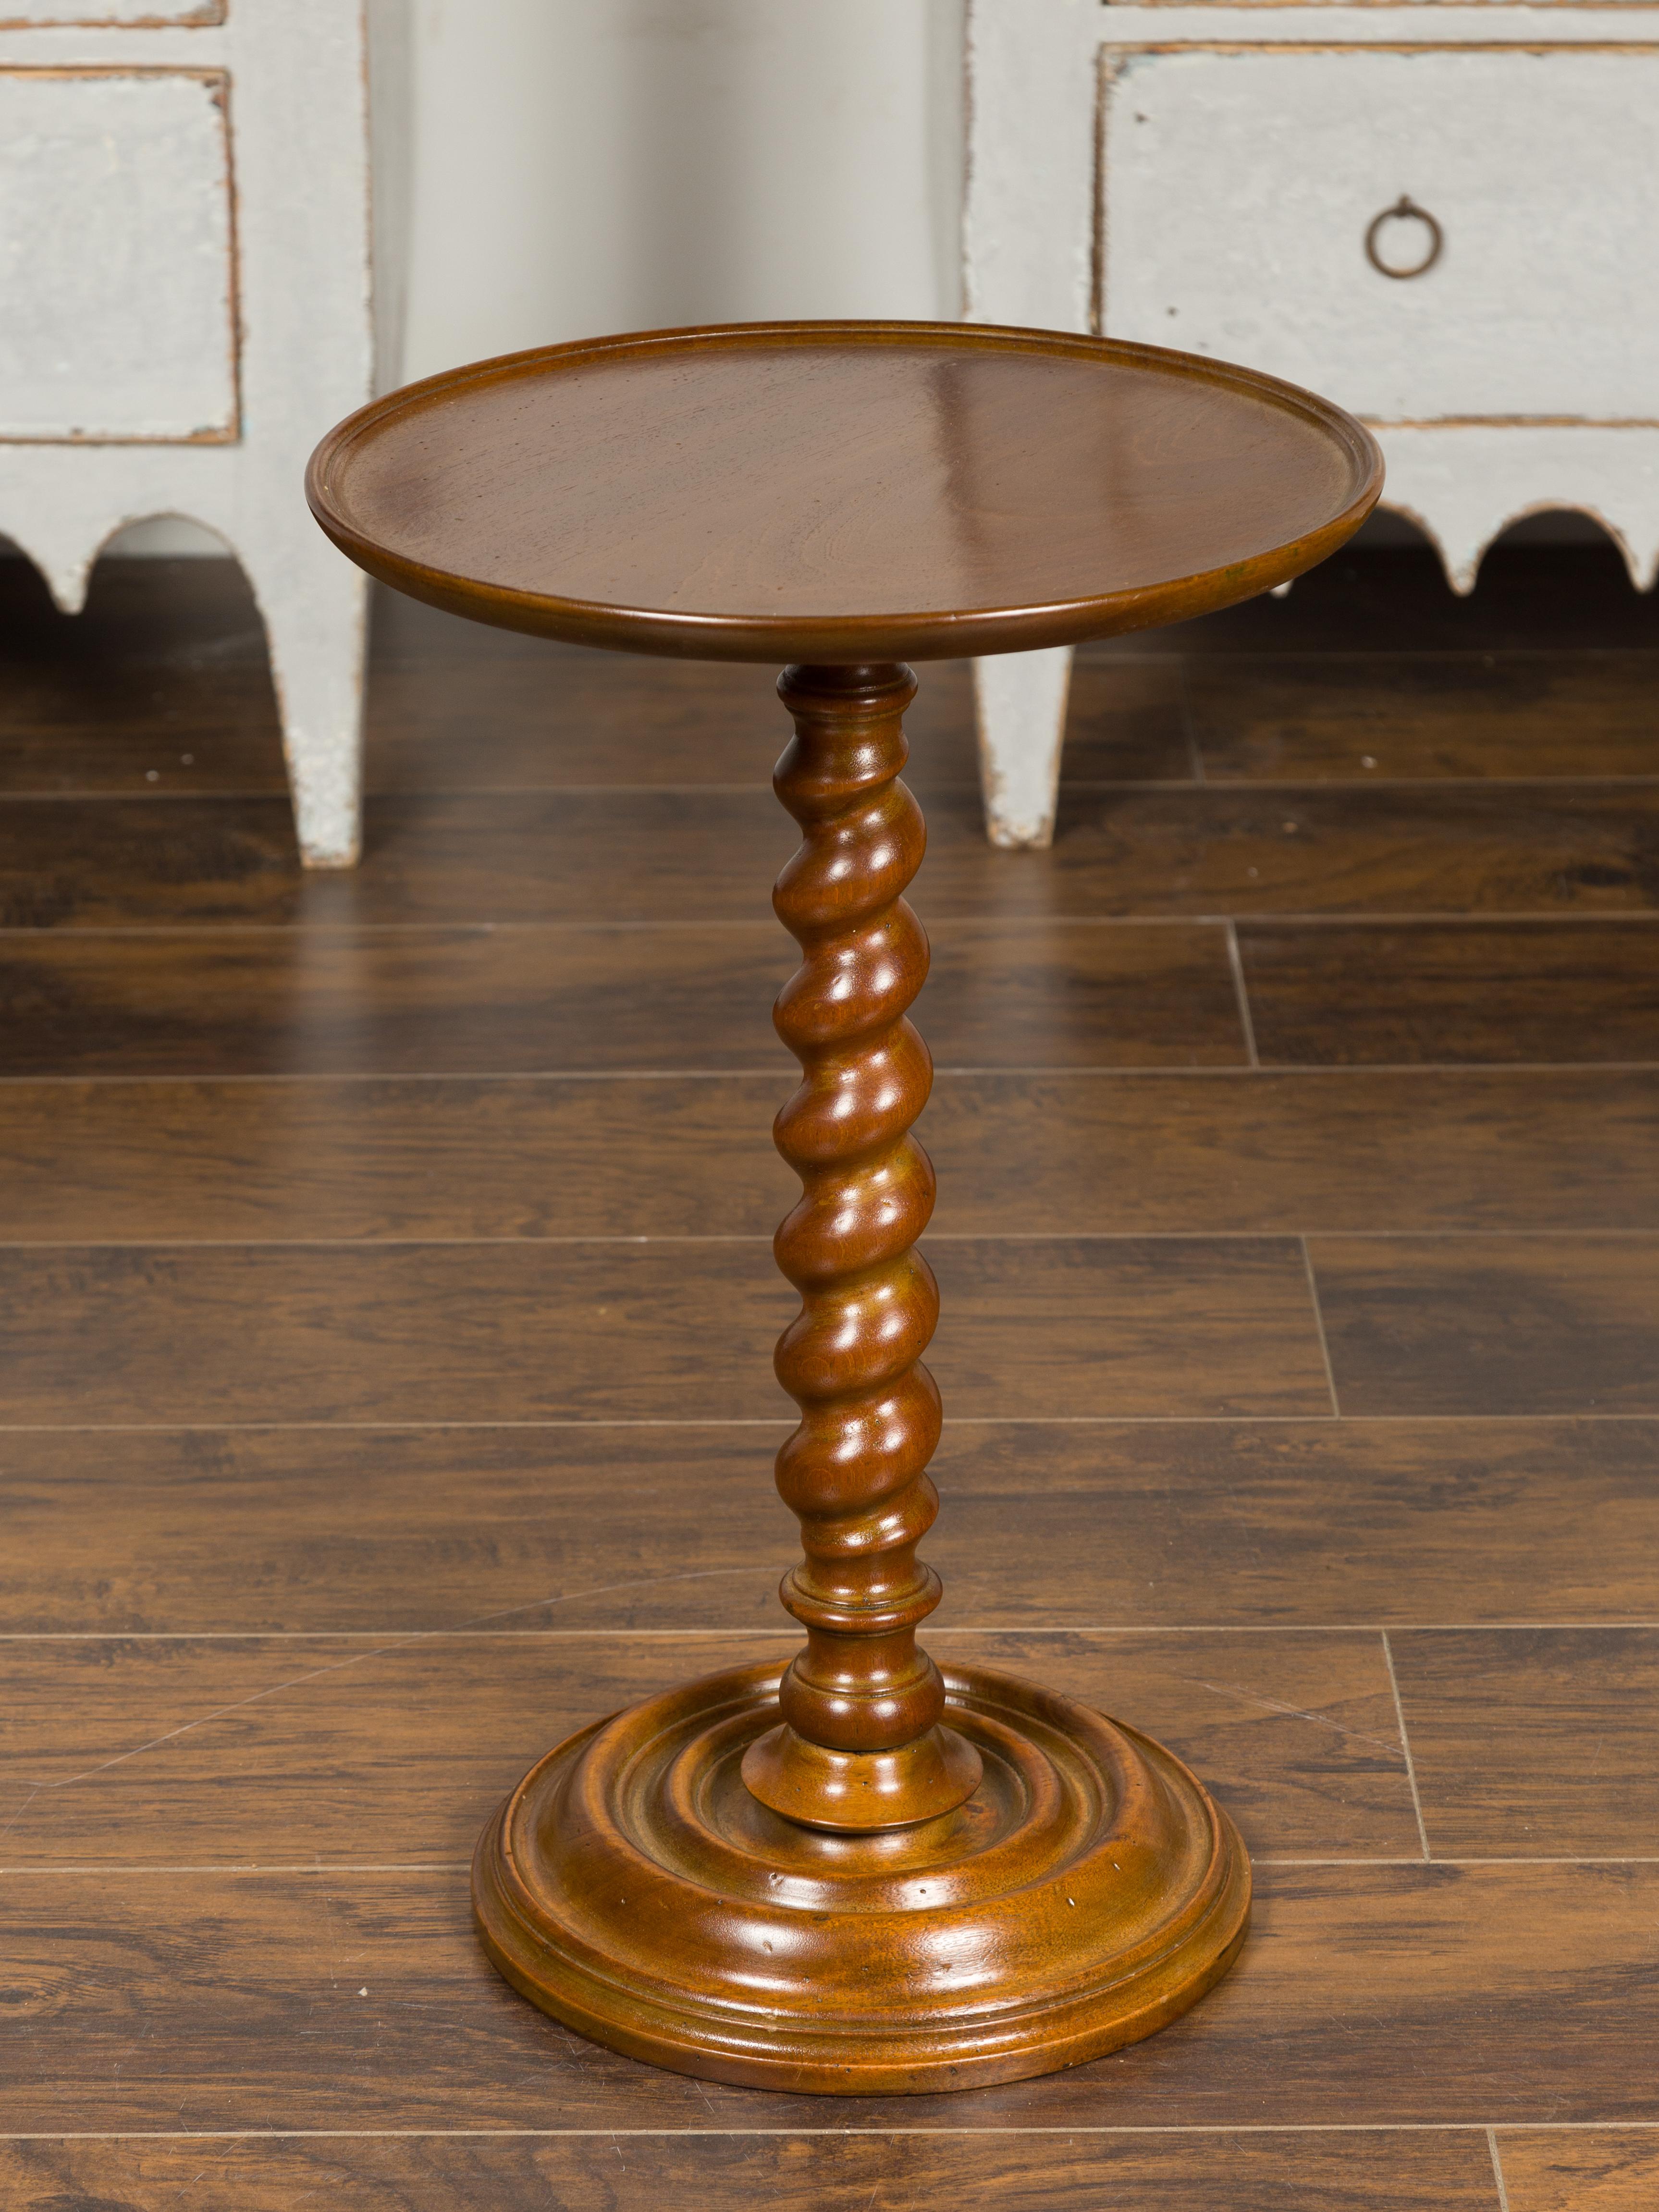 A French Louis XIII style wooden side table from the mid-20th century, with circular top and barley twist pedestal base. Born in France during the mid-century period, this small side table features a round tray top, sitting above an eye-catching